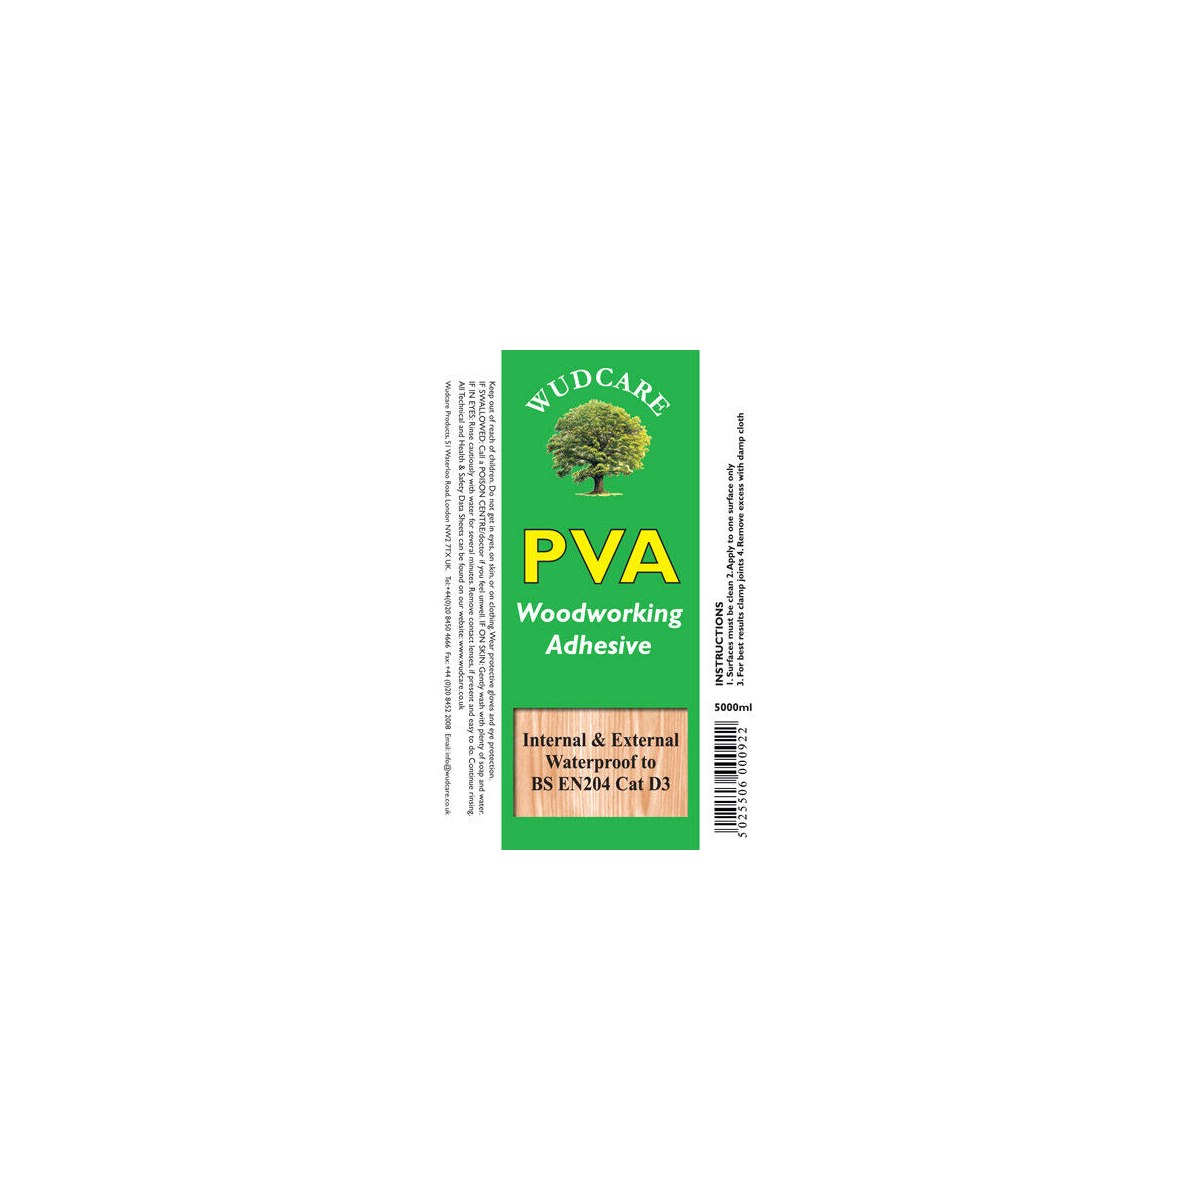 Where to buy Wudcare PVA Woodworking Glue